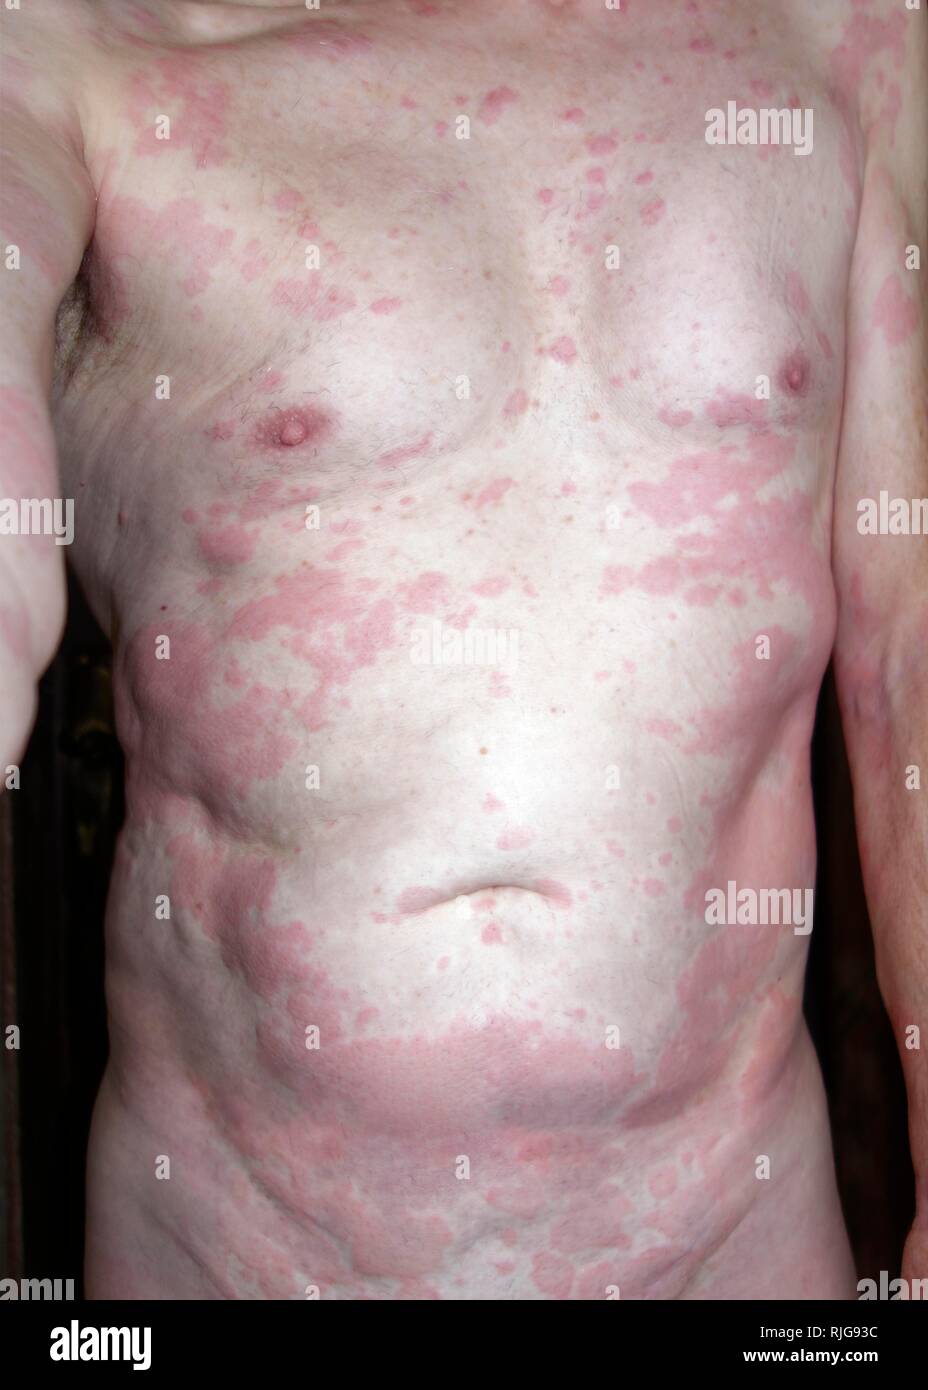 Man, 68 years old, with allergic reaction, skin rash, allergy, to insect repellent Baygon, Indonesia Stock Photo